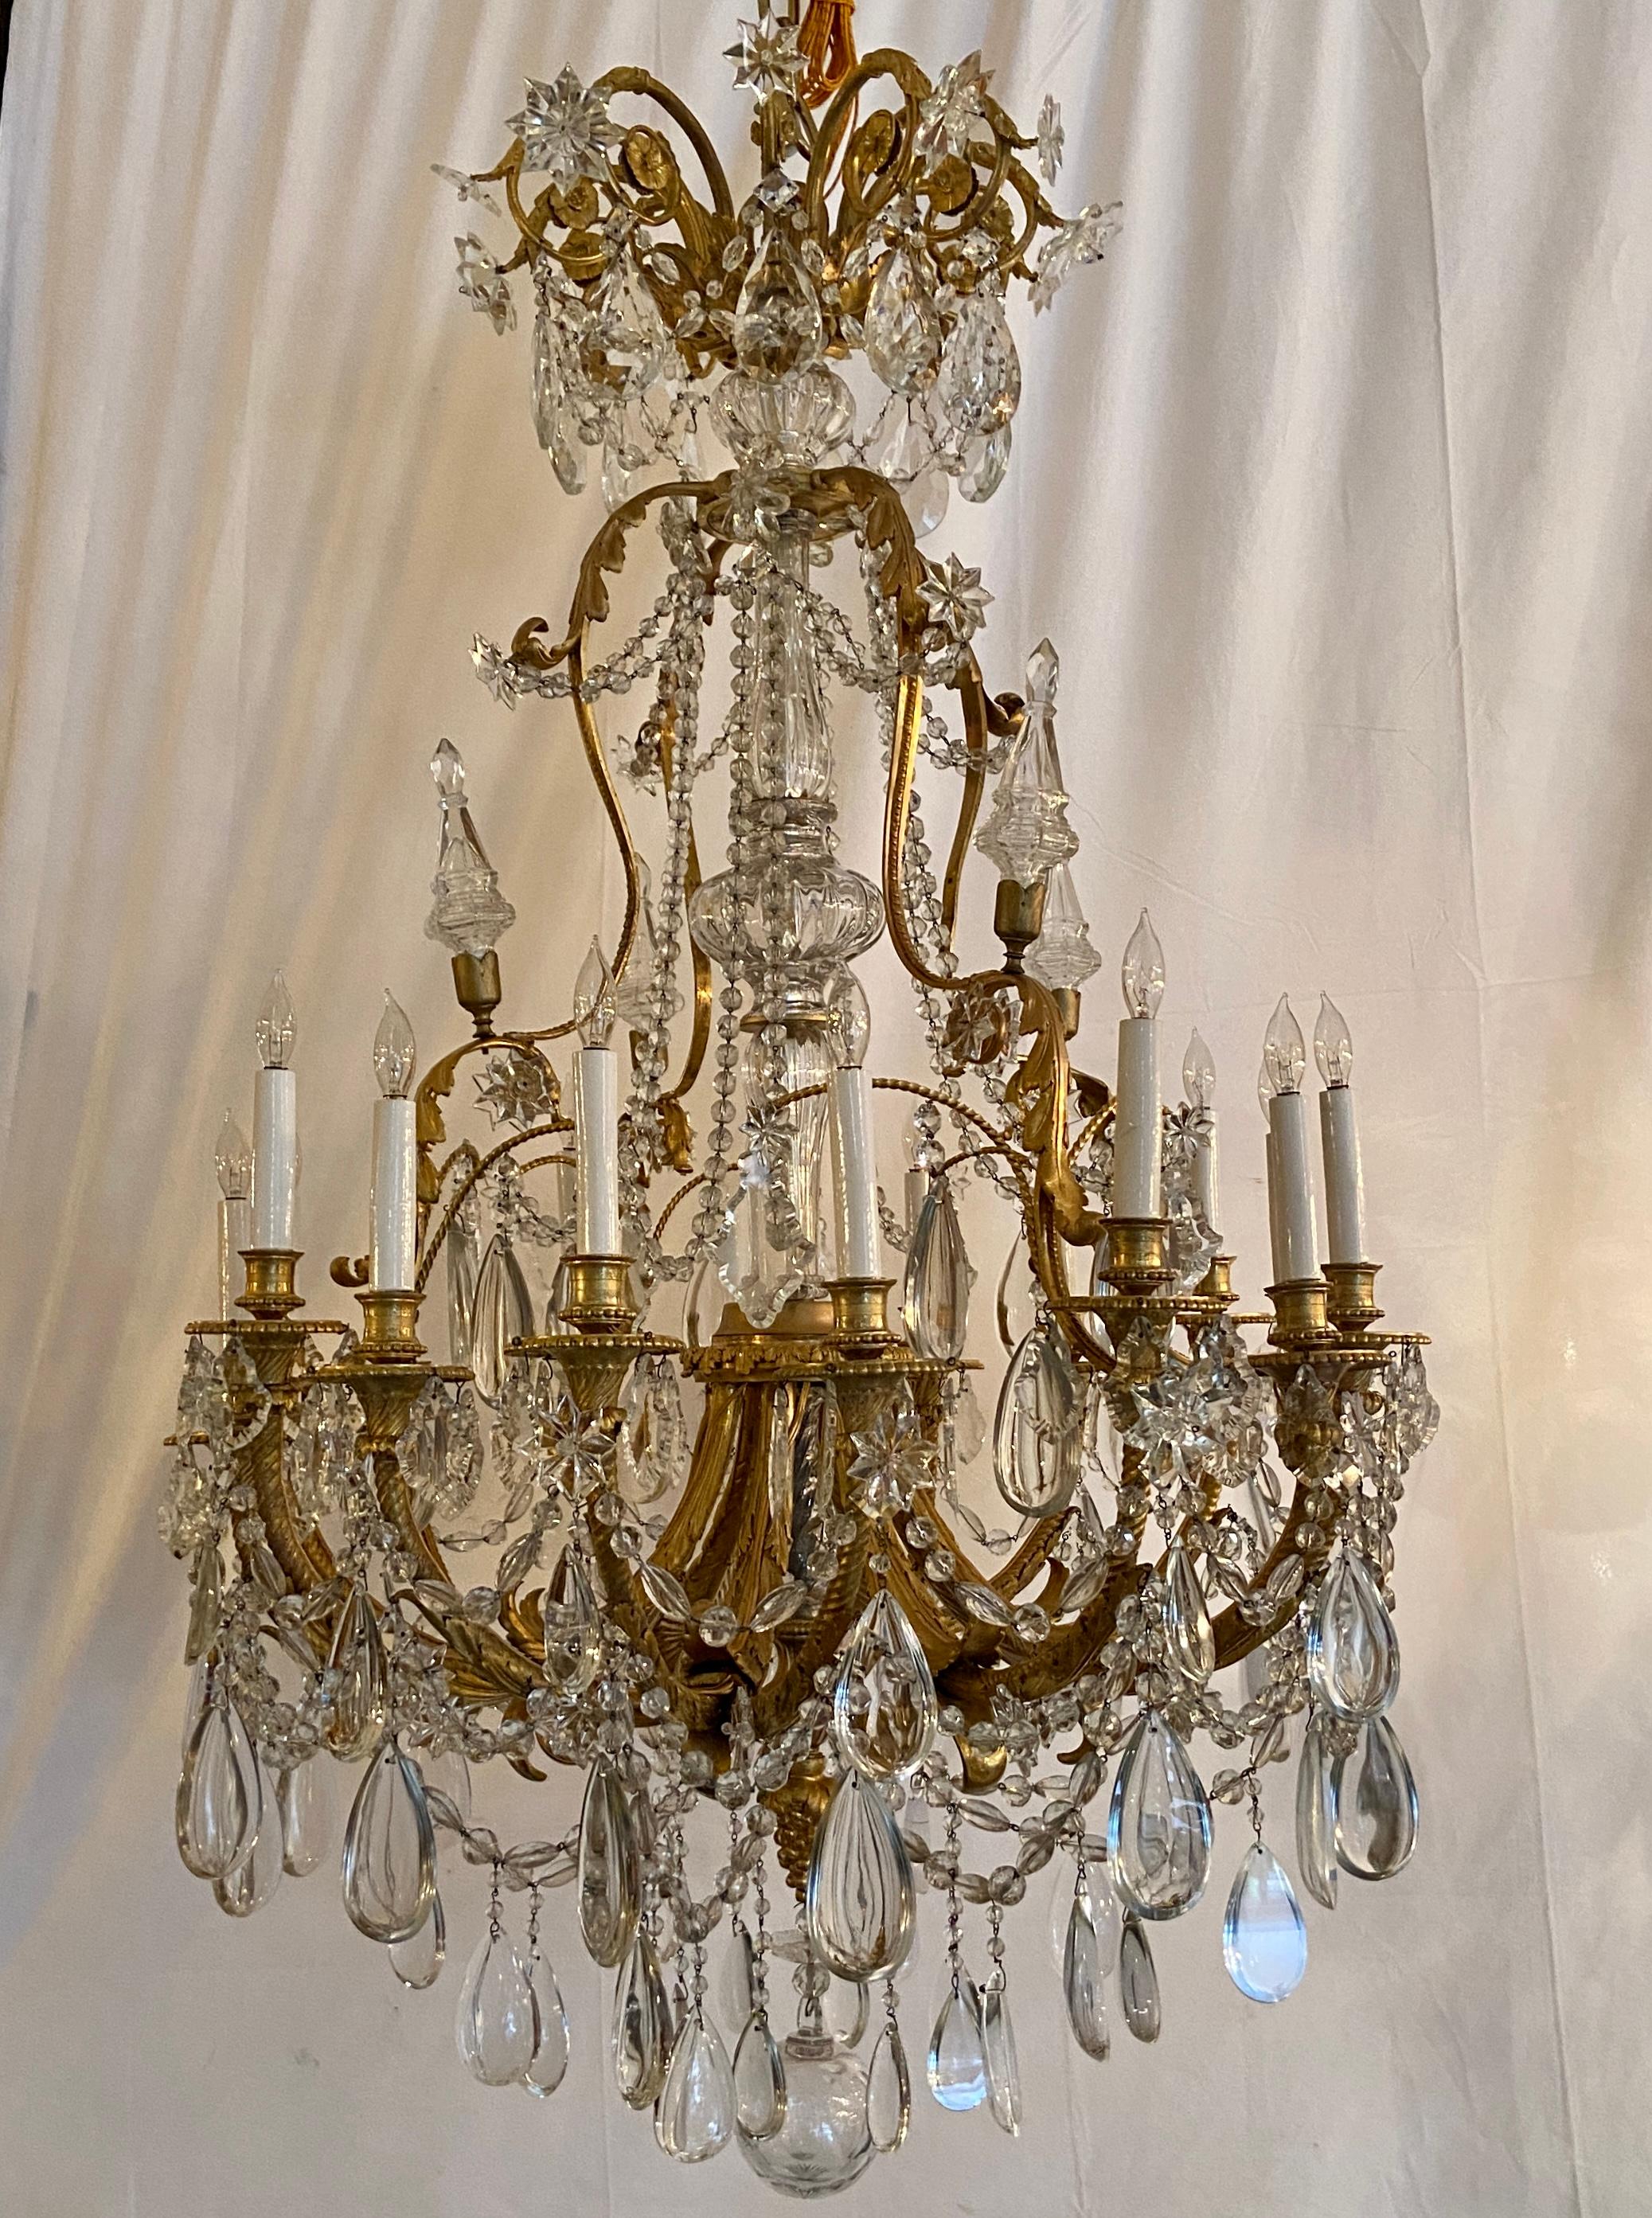 Antique French Exceptional Ormolu bronze chandelier with Baccarat crystal polished prisms, Circa 1860.